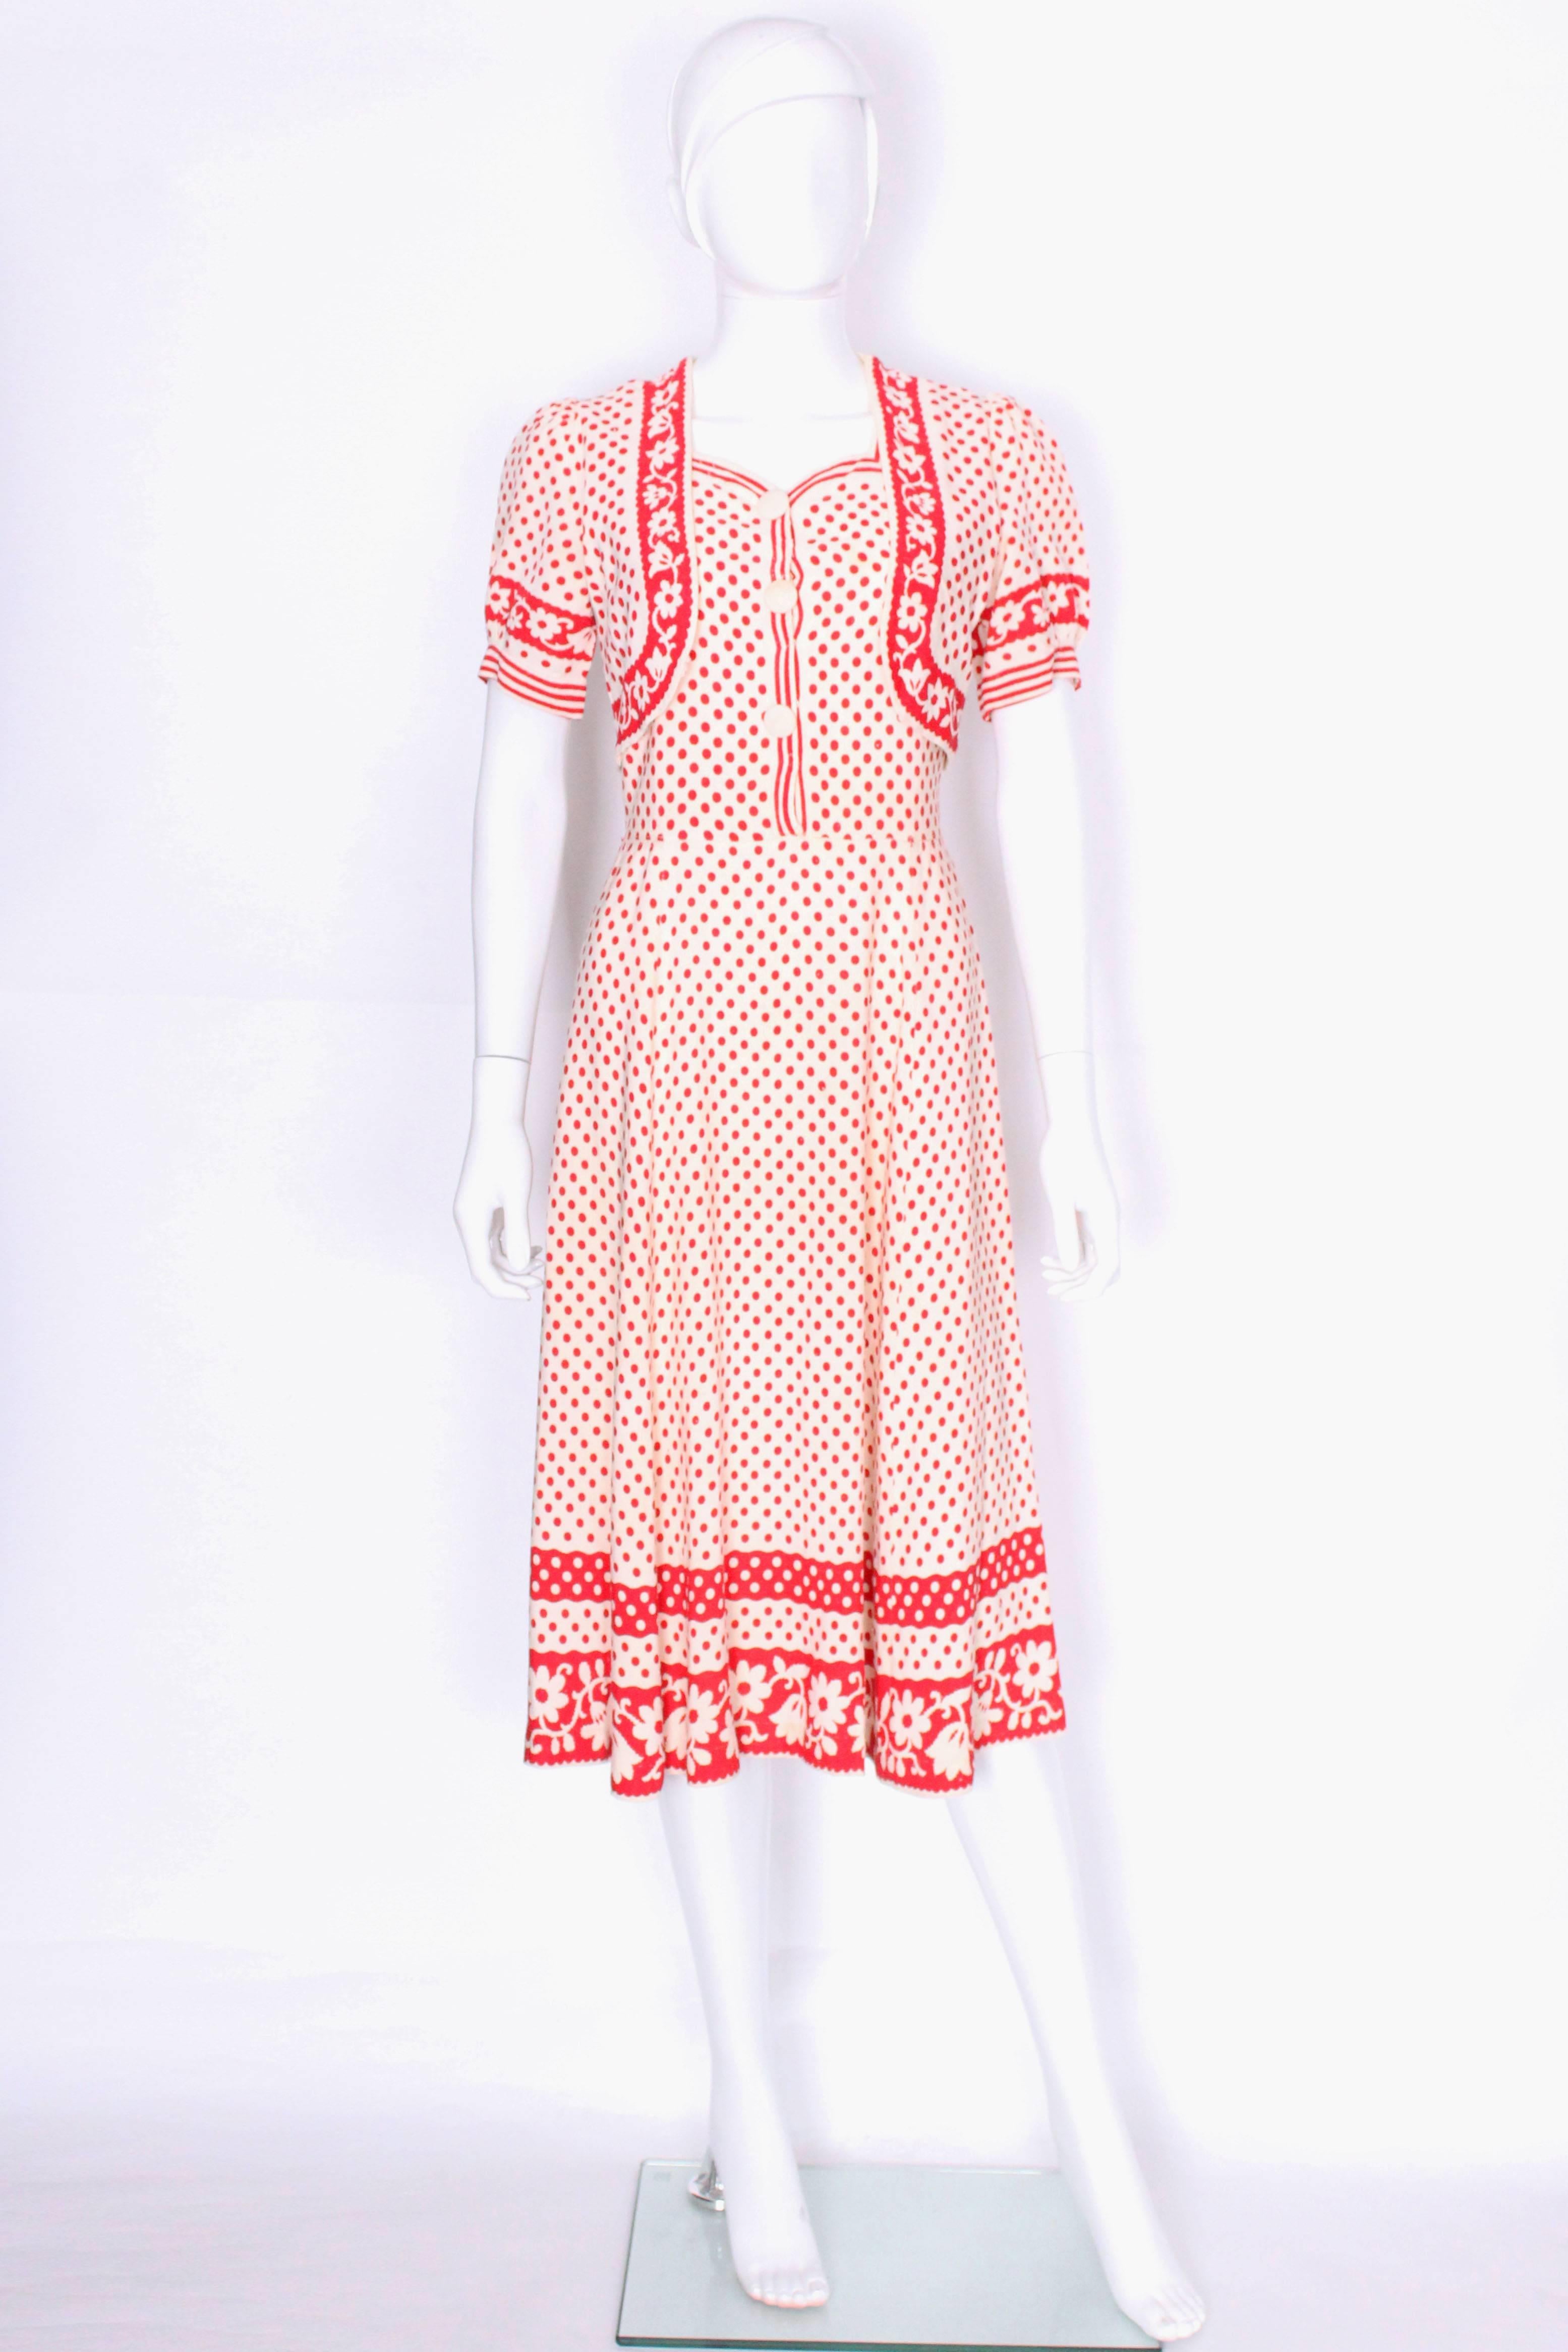 A charming and chic French dress dating from the 1940s. The dress has a sweetheart neckline and 3 buttons down the front that undo underneath with a popper. There is a short puff sleeved bolero that sits over the the top but is actually attached on